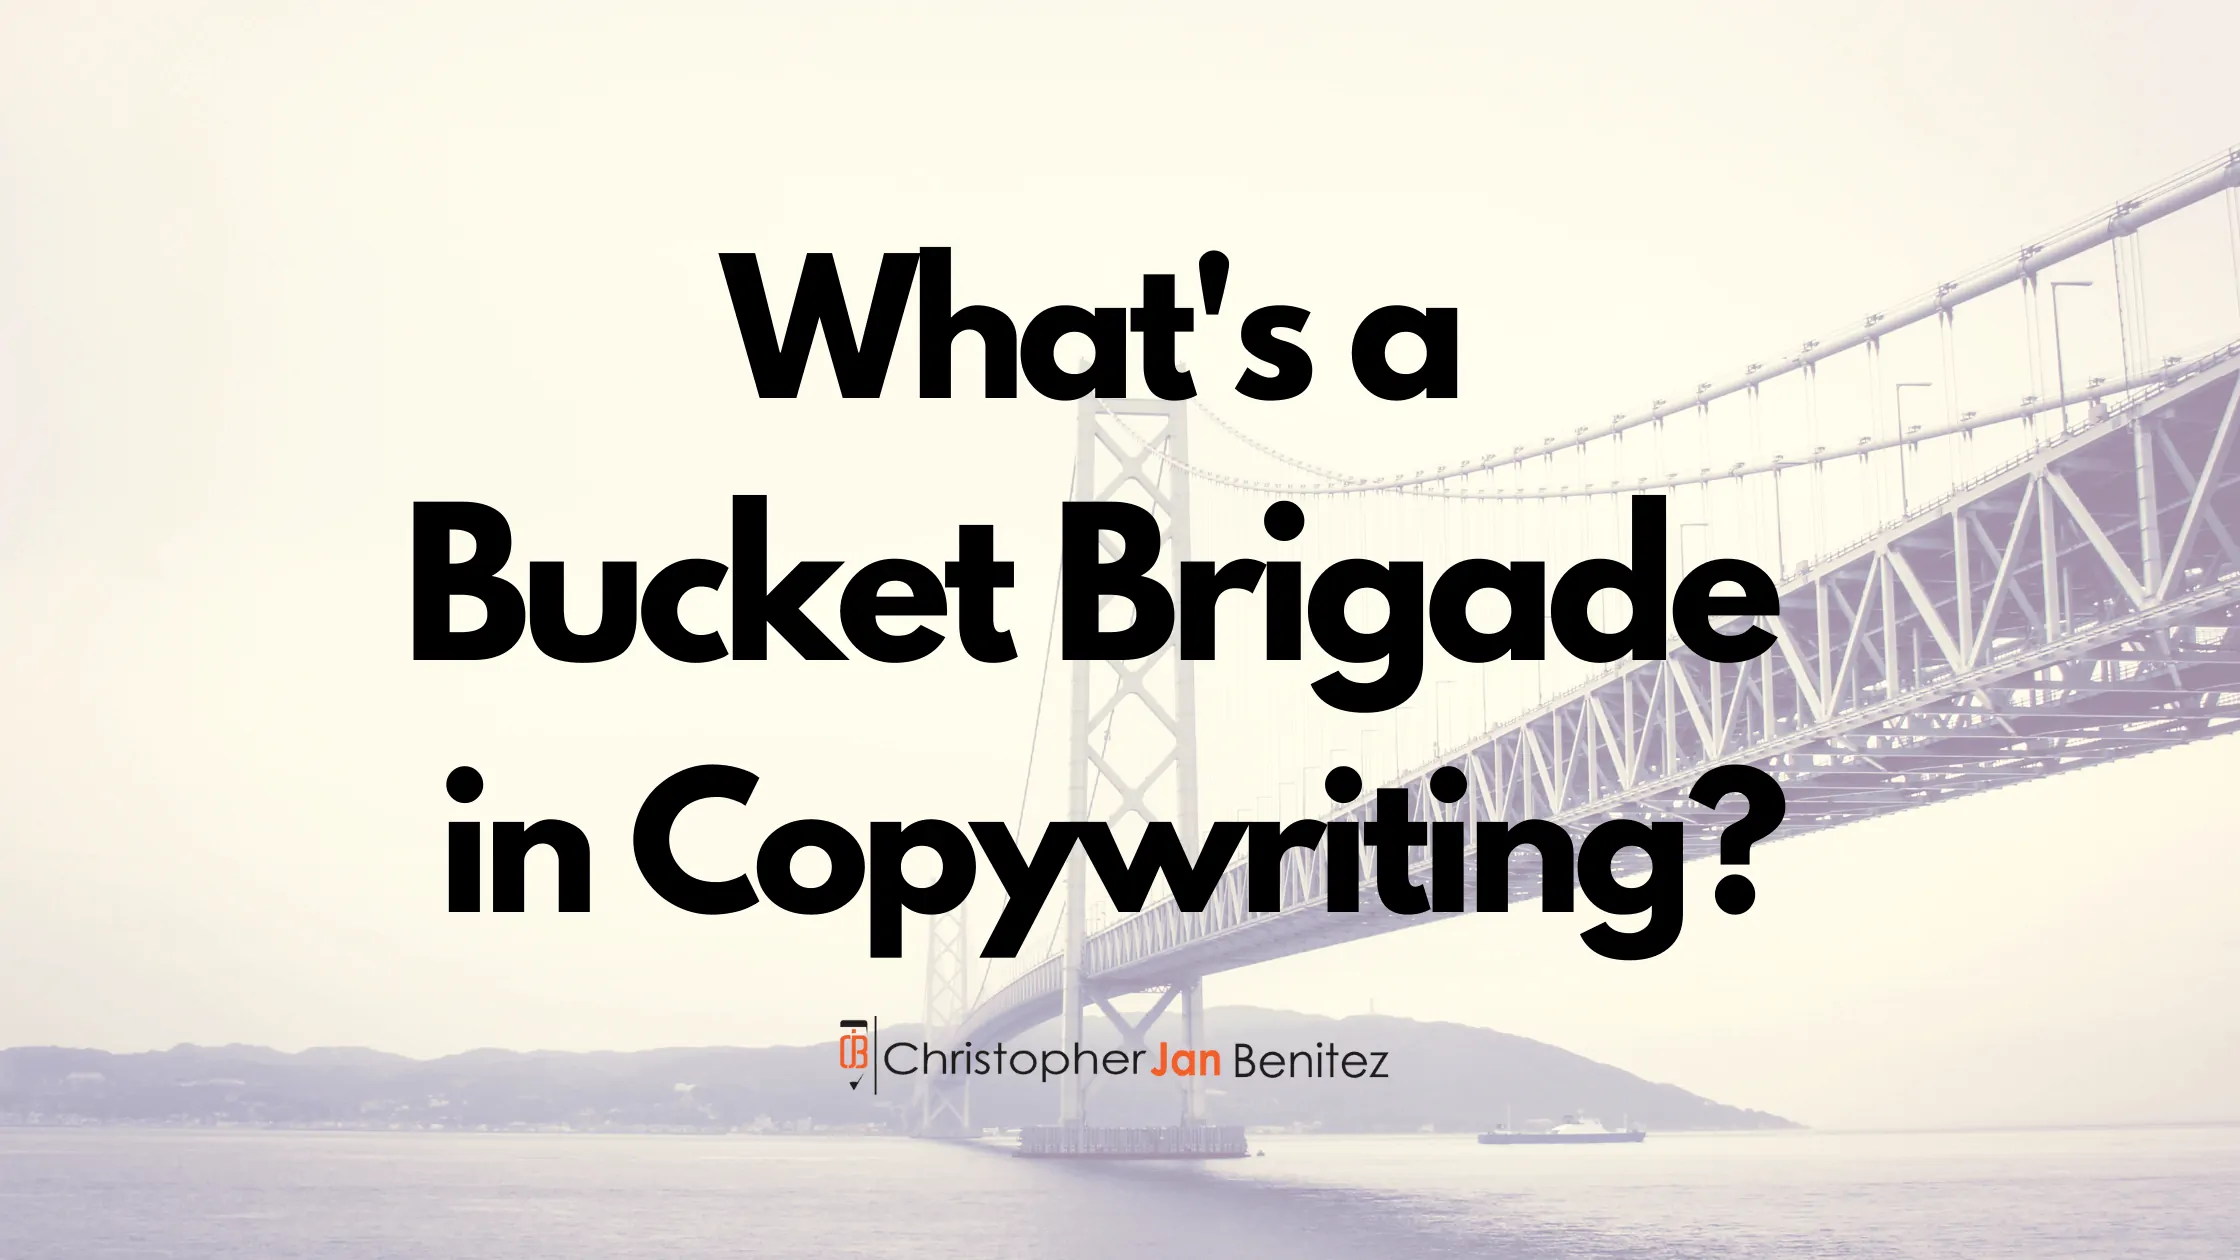 What’s a Bucket Brigade in Copywriting?